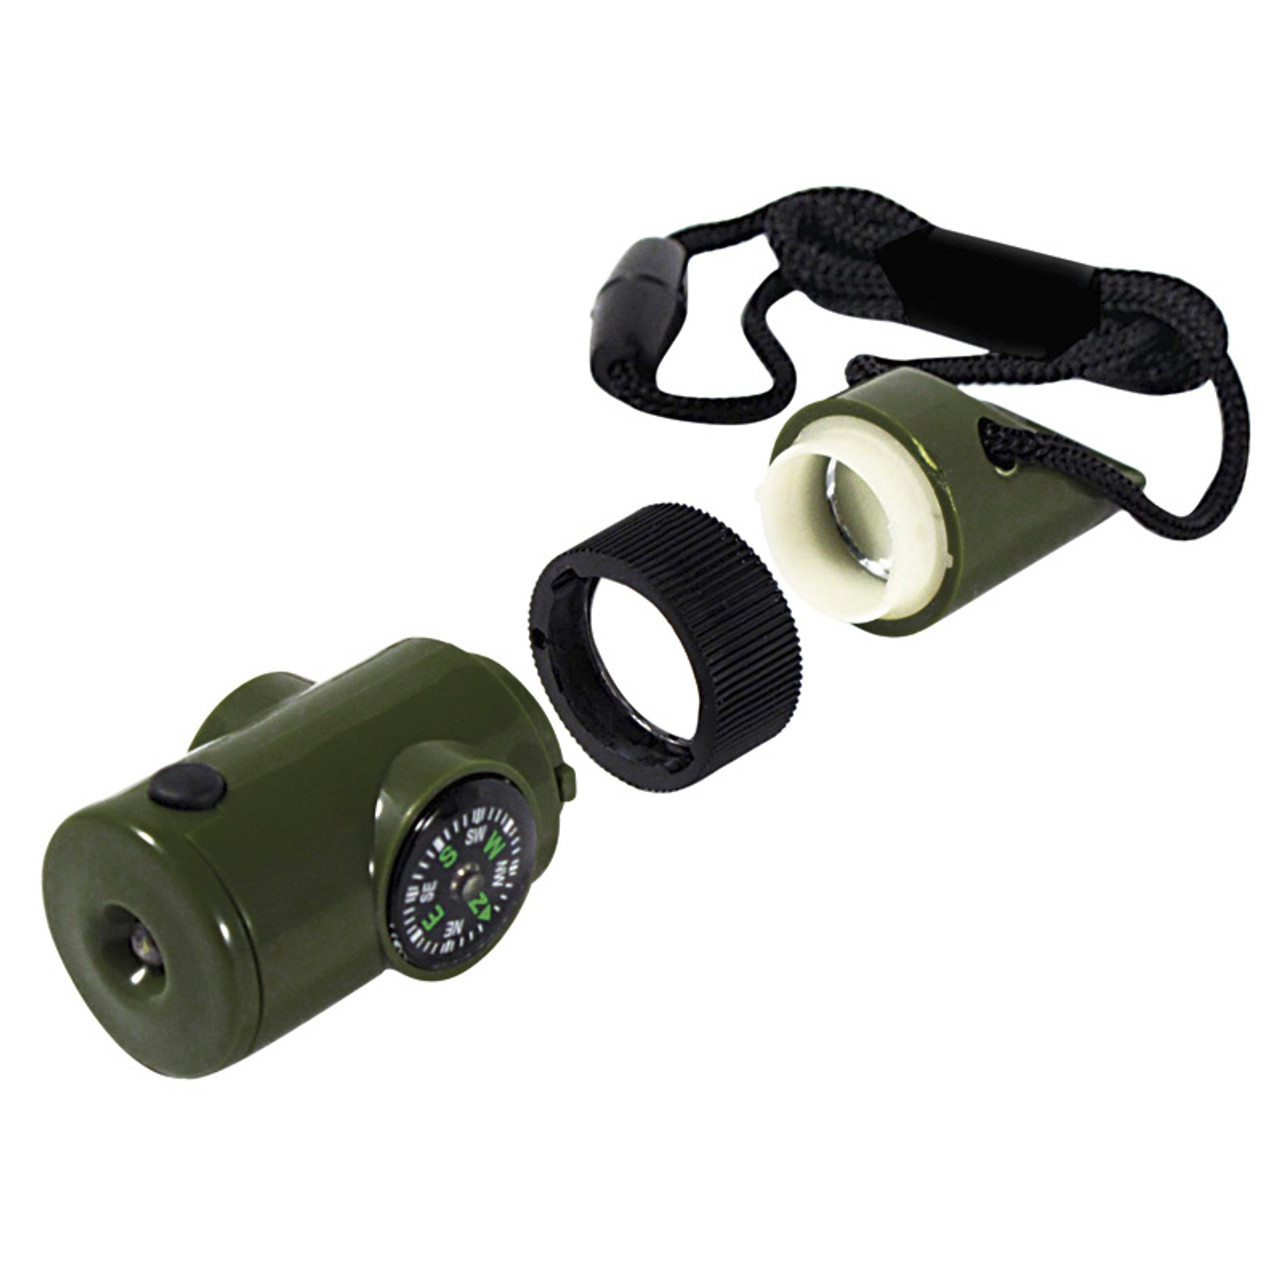 https://cdn11.bigcommerce.com/s-tumf4kk1l4/images/stencil/1280x1280/products/3187/5859/green-7-in-1-survival-whistle-with-led-flashlight-and-compass-20__24915.1640715104.jpg?c=1?imbypass=on